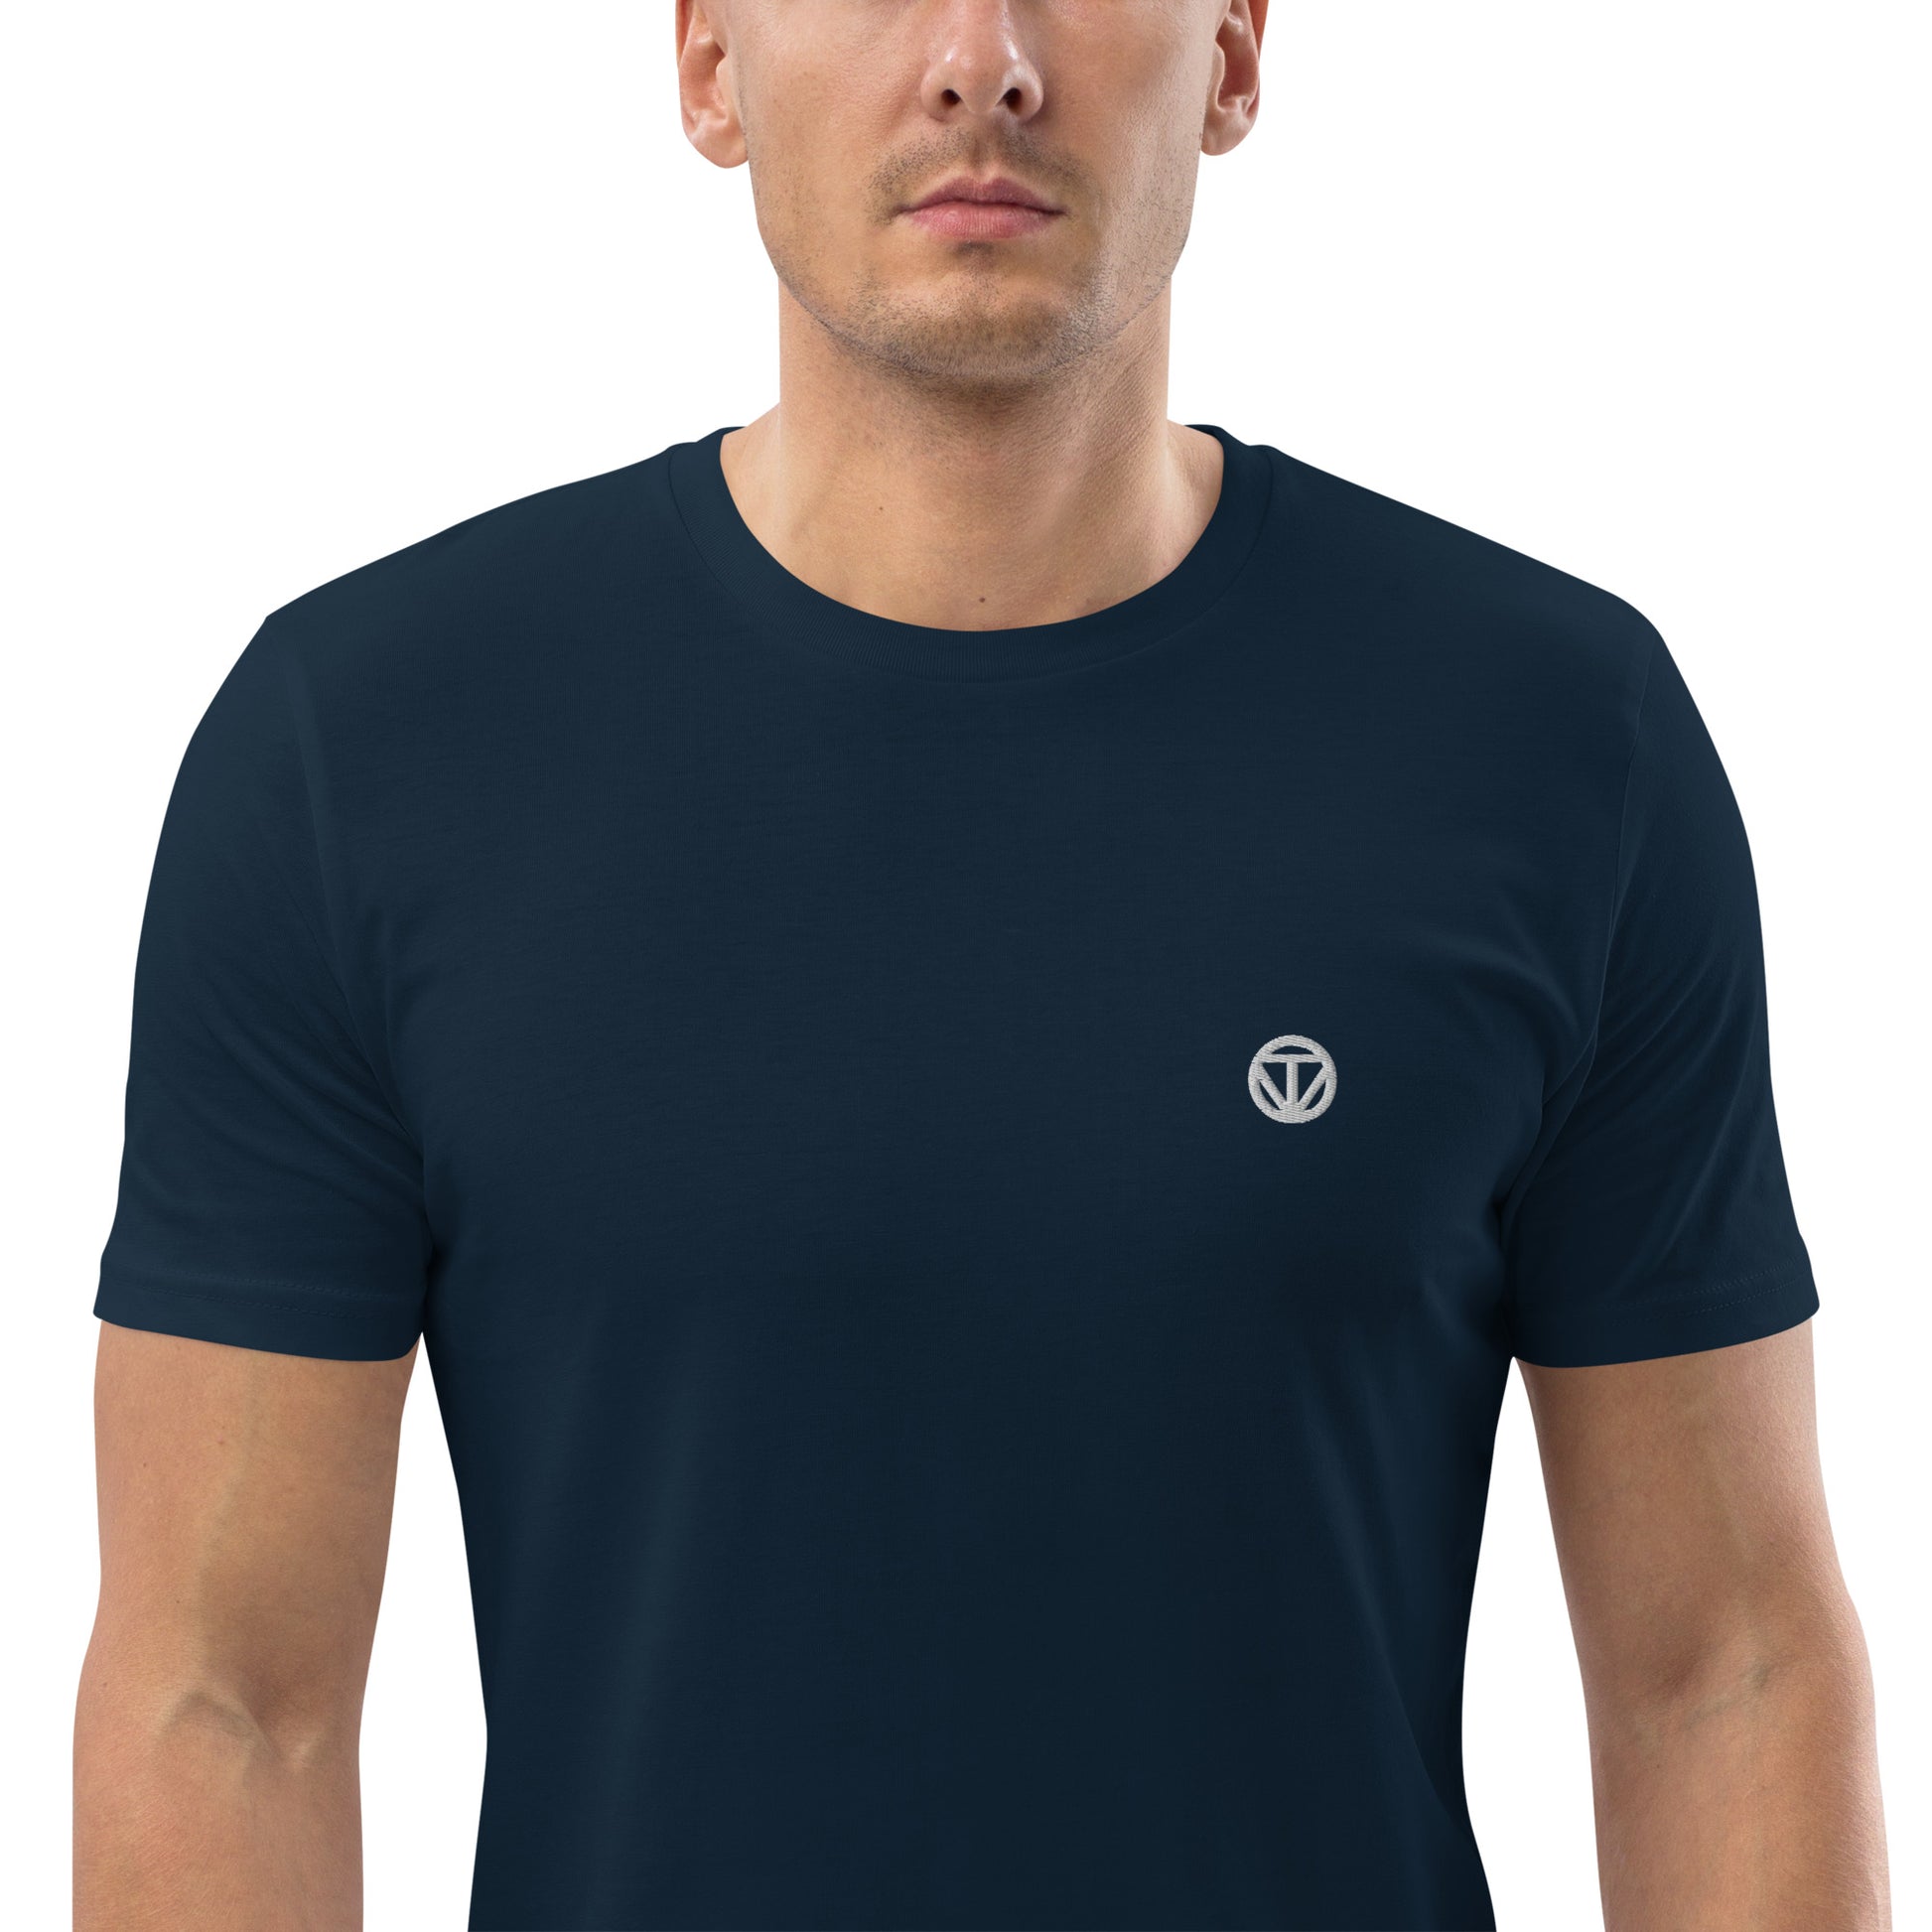 TIME OF VIBES - Organic Cotton T-Shirt (Navy/White) - €33.50